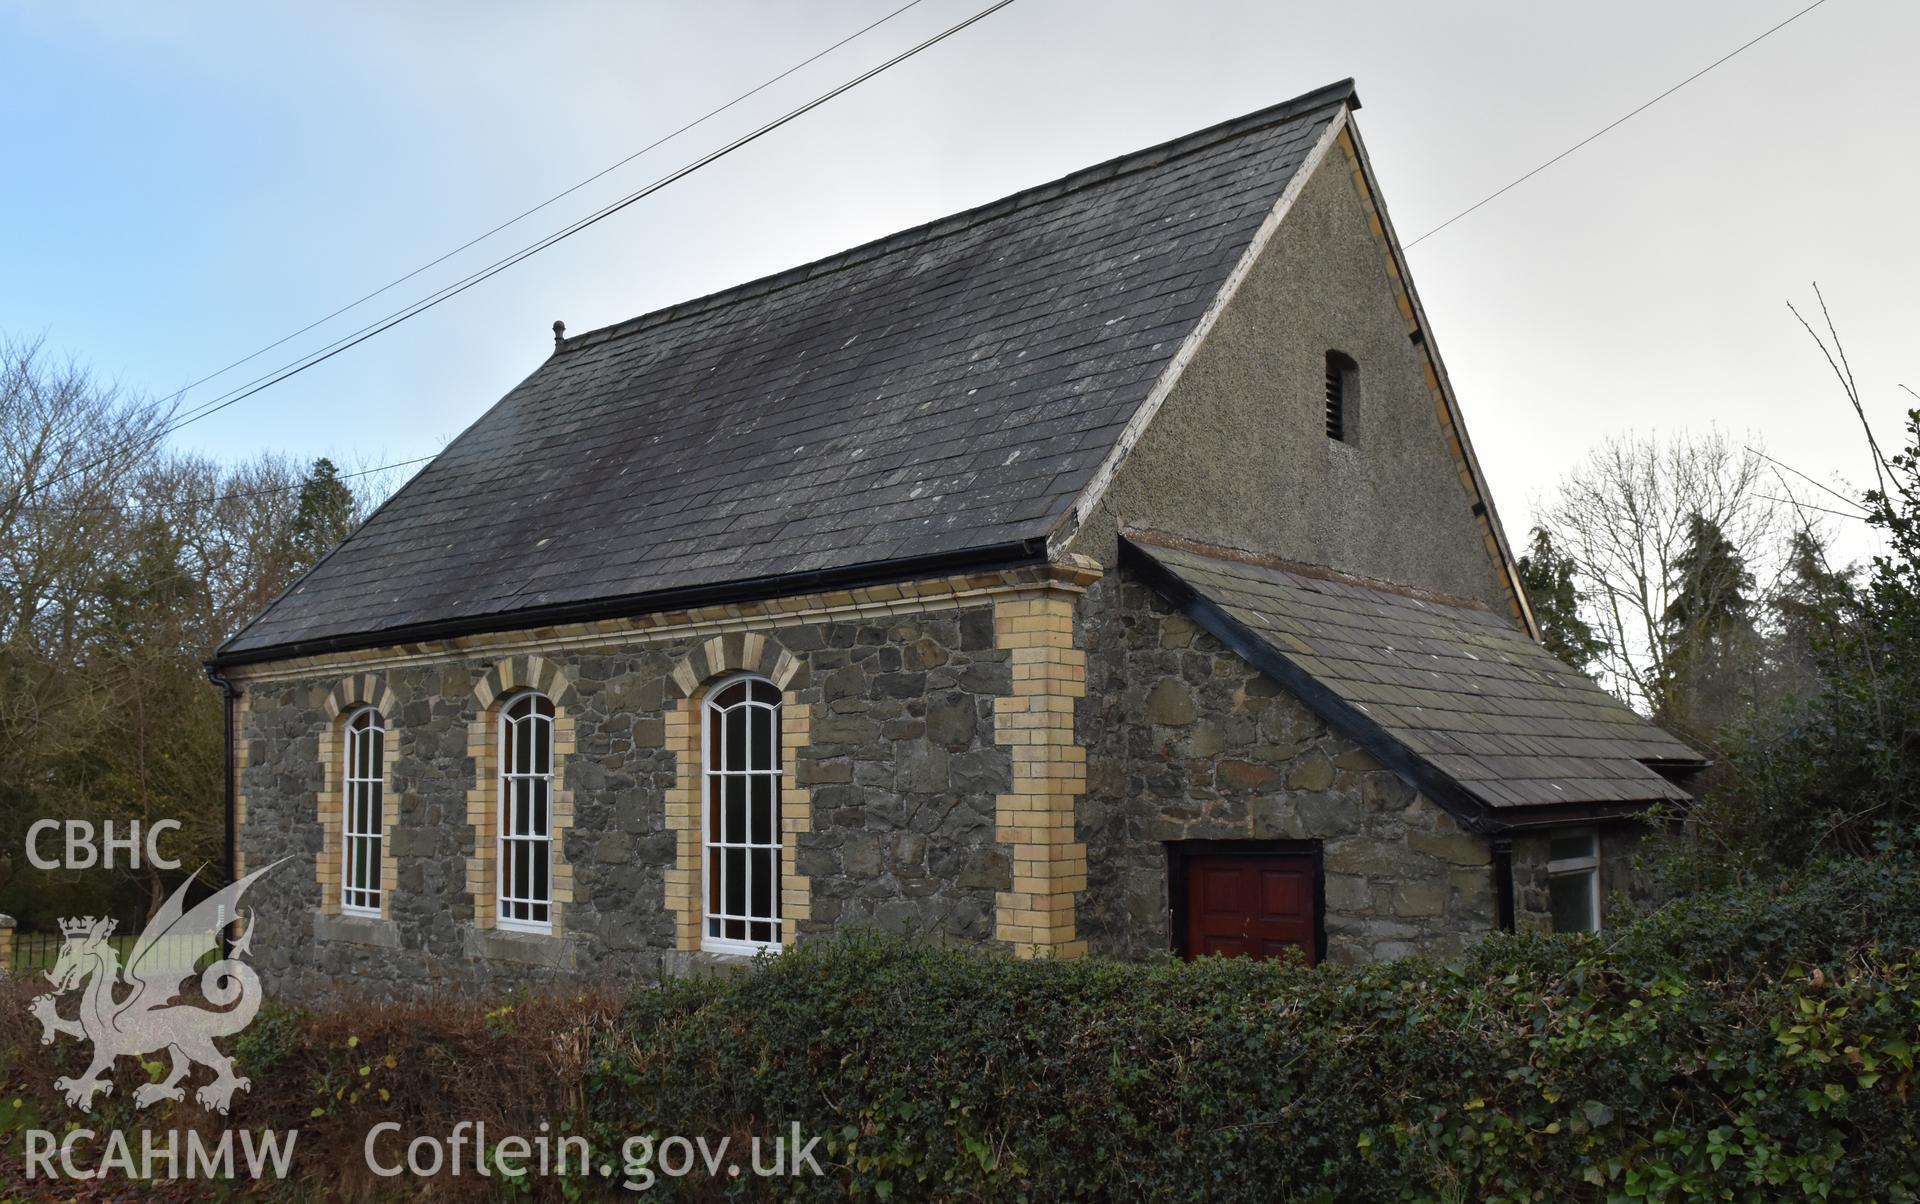 View from the south showing exterior side elevation of Hyssington Primitive Methodist Chapel, Hyssington, Churchstoke. Photographic survey conducted by Sue Fielding on 7th December 2018.